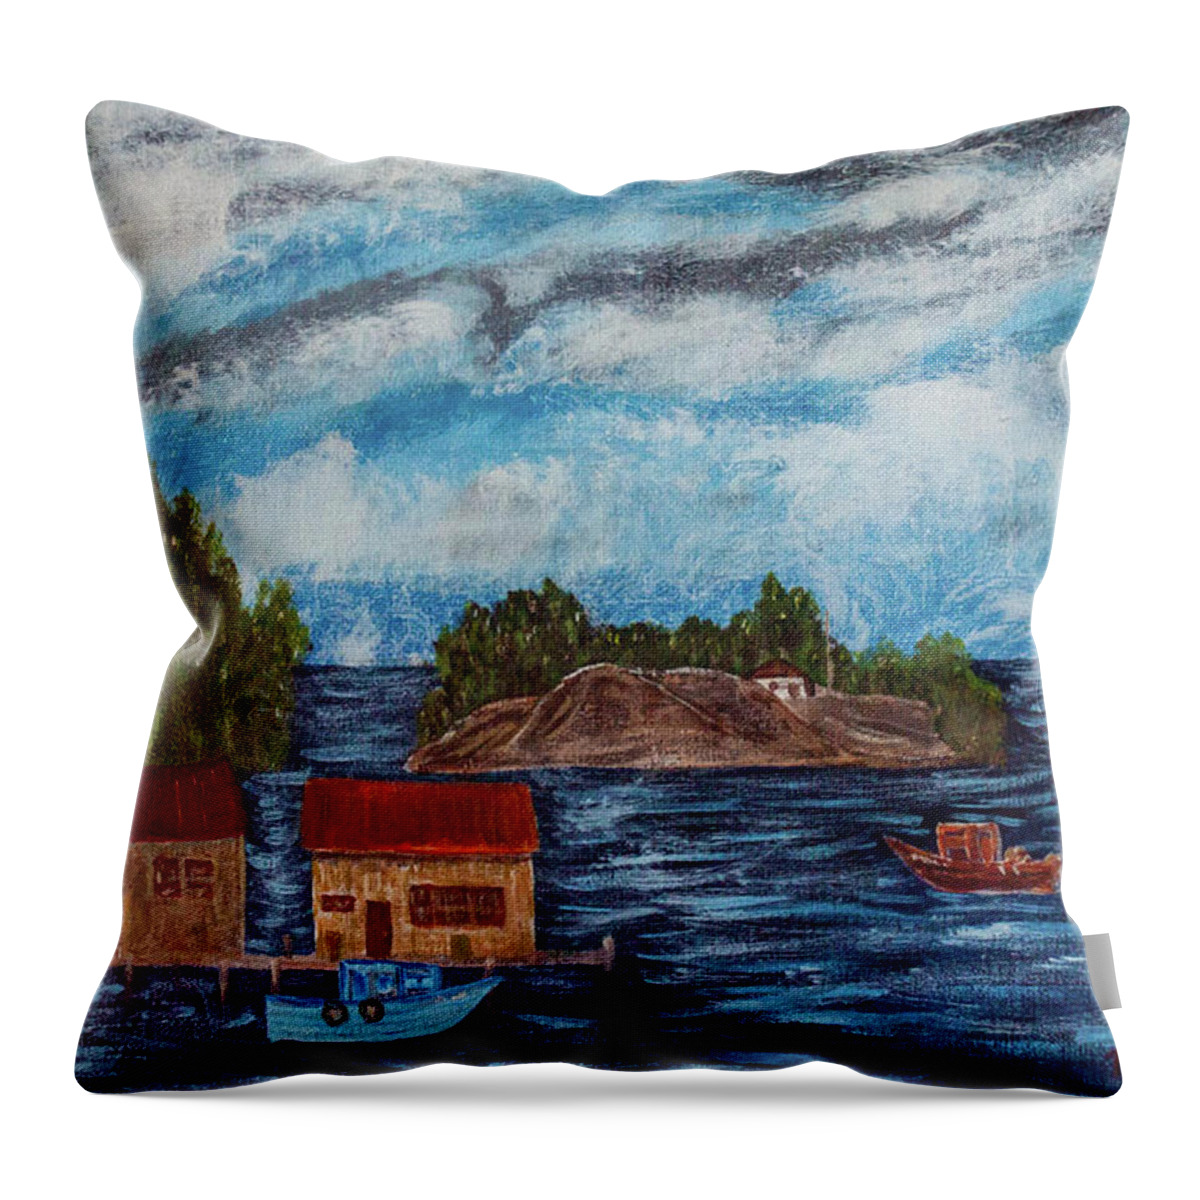 Stormy Throw Pillow featuring the painting Stormy Day by Randy Sylvia